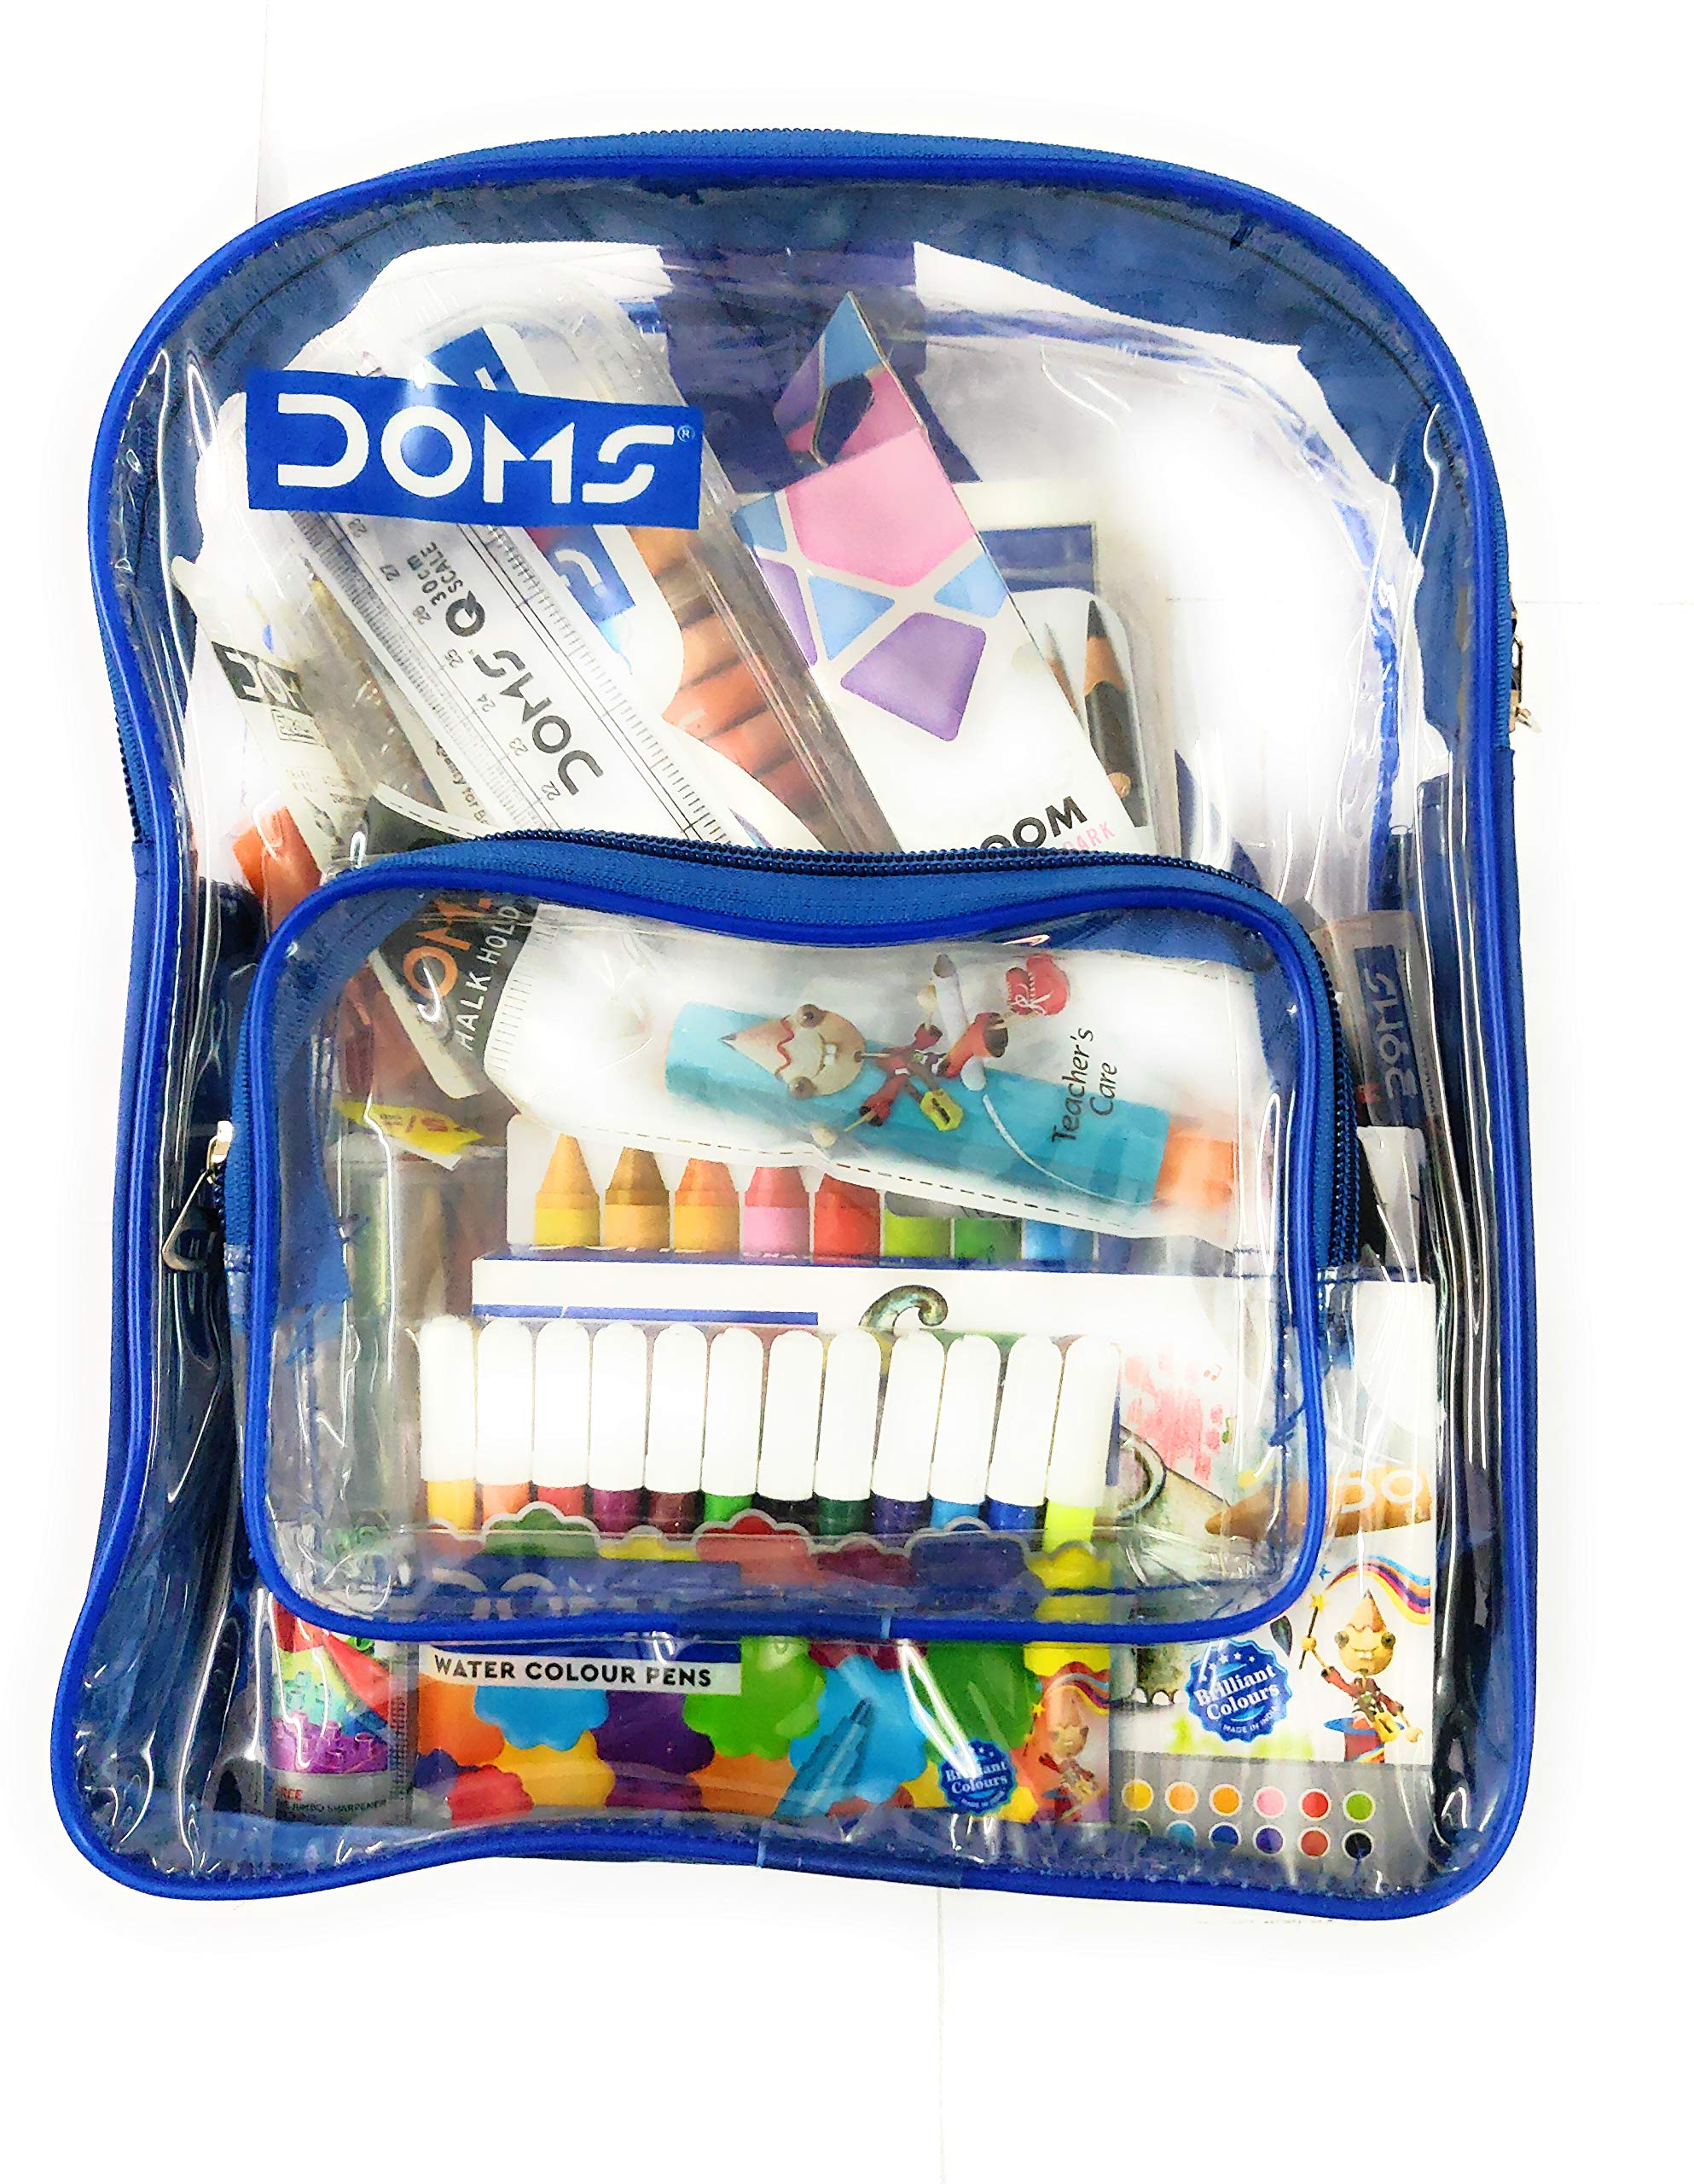 Doms Smart Colouring kit Bag  School Stationery set  Doms Art and Craft  kit  YouTube